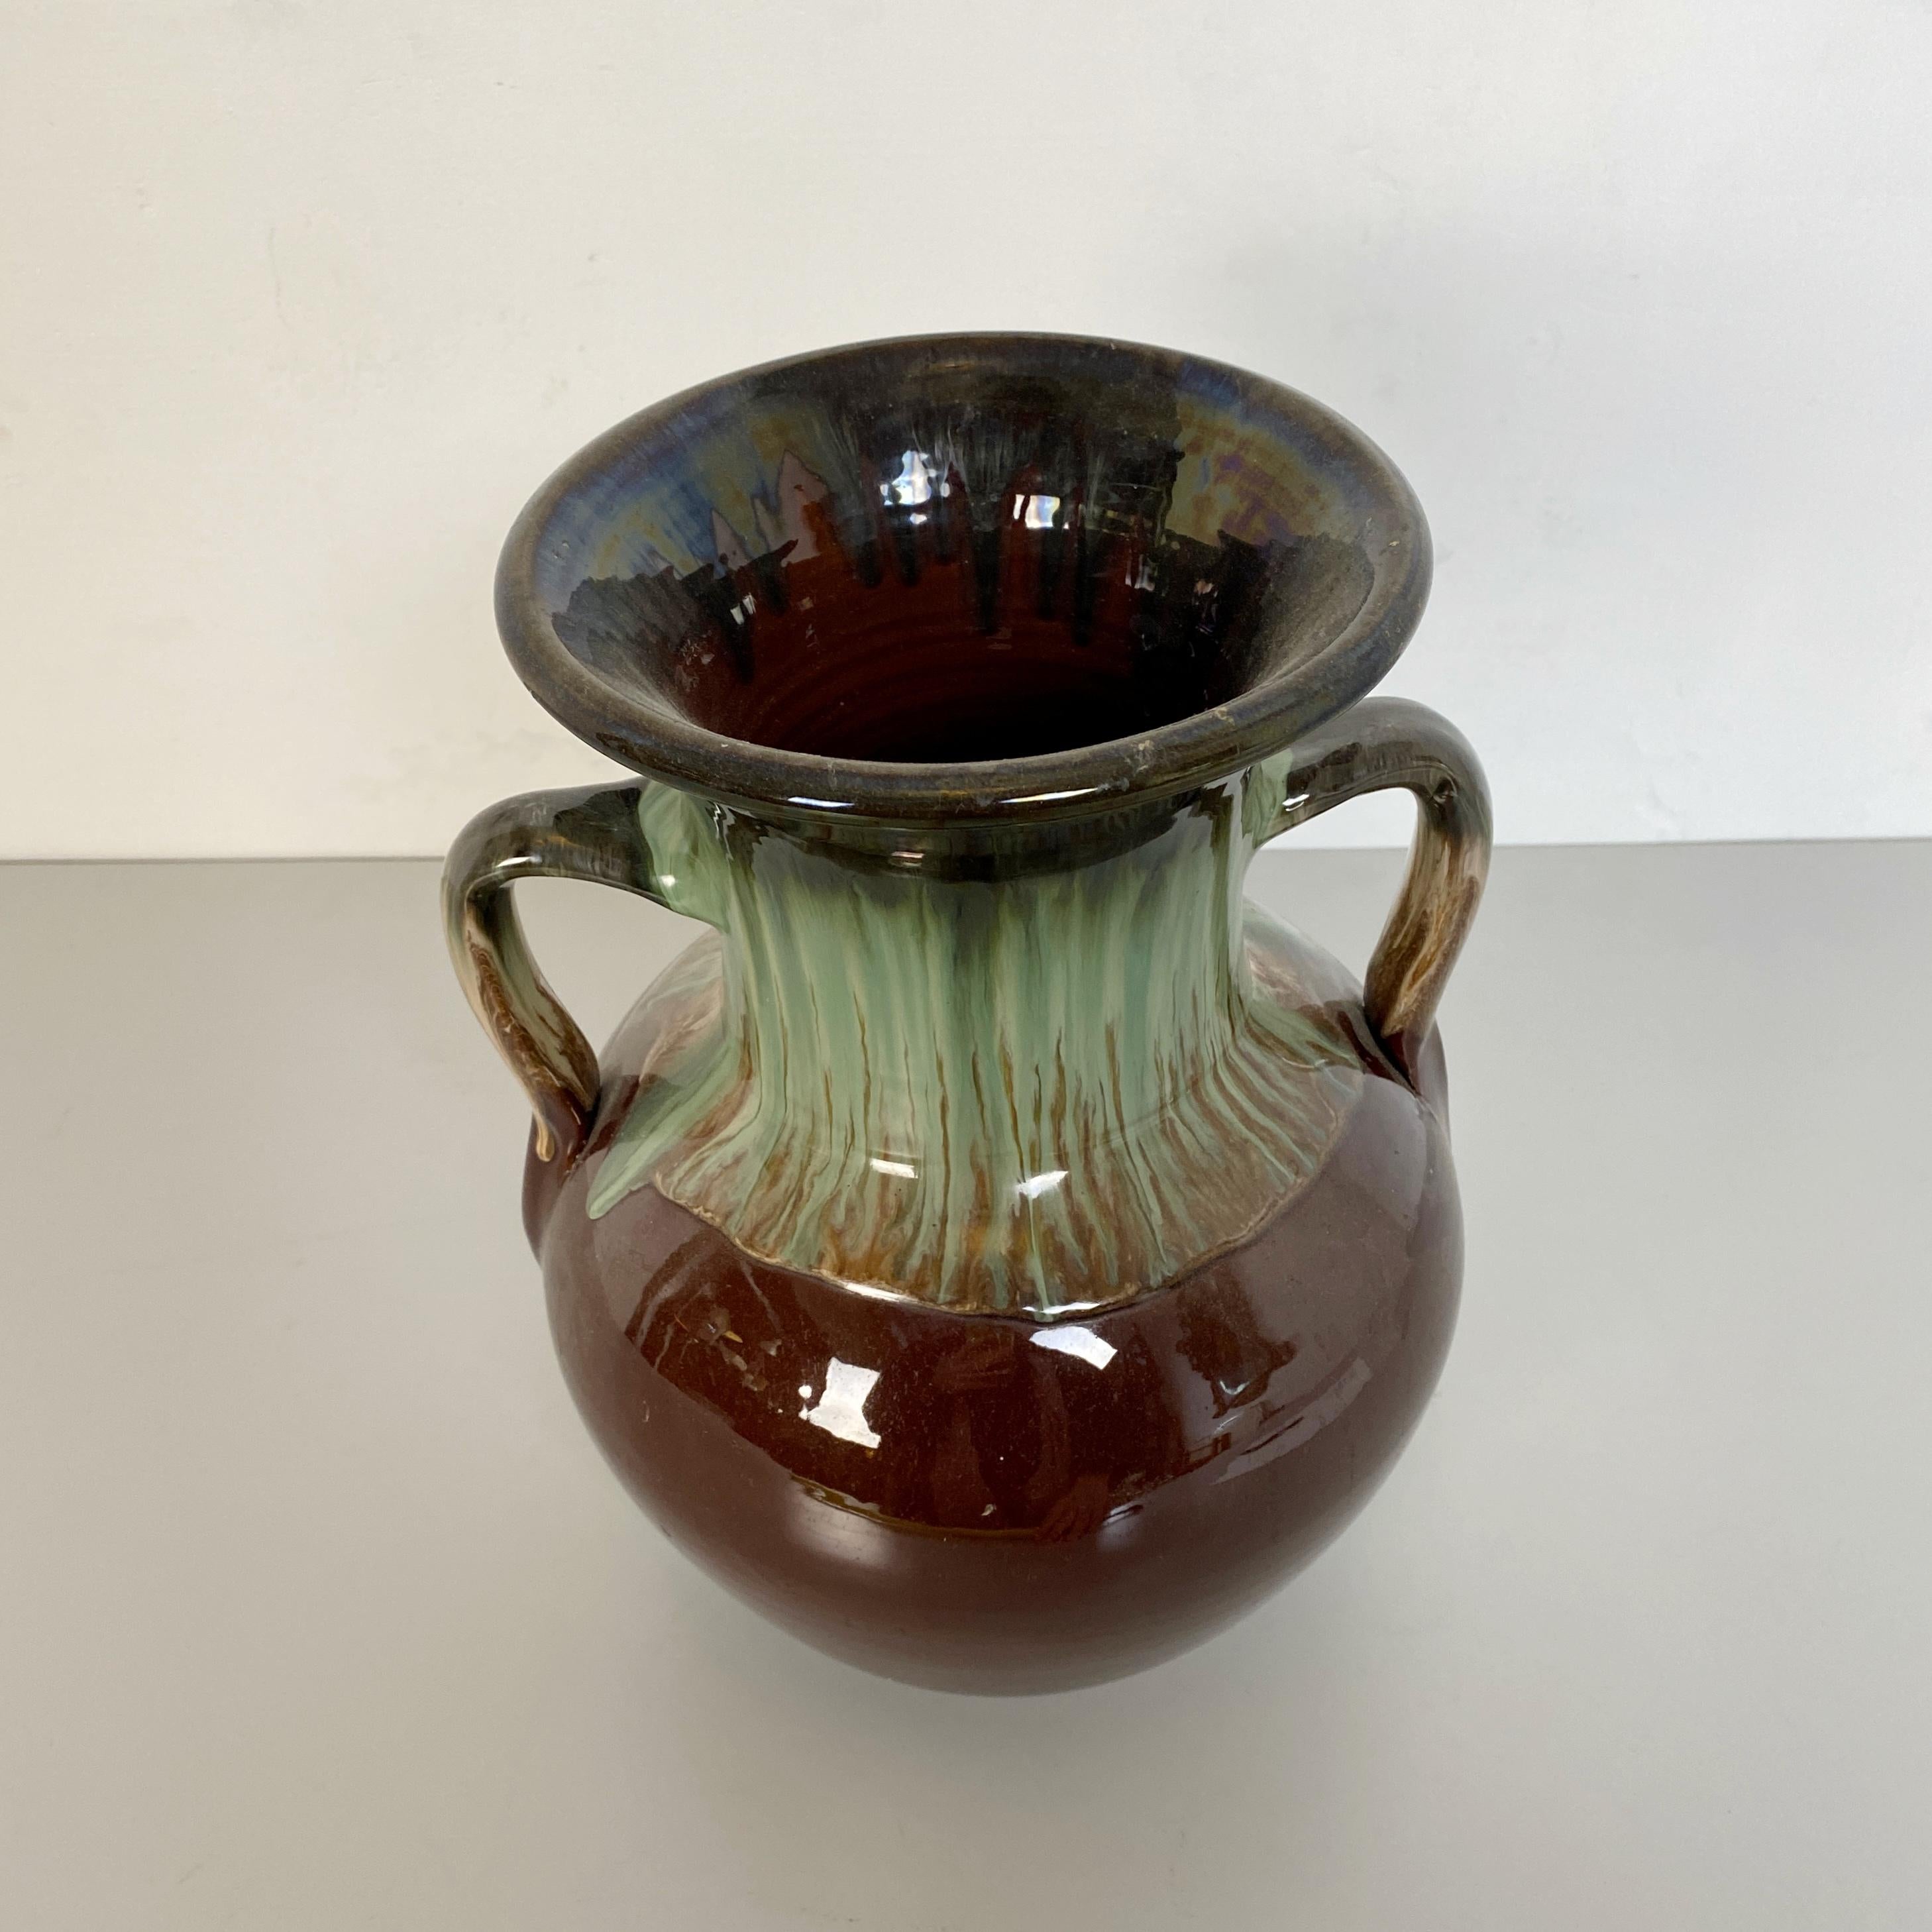 Italian Mid-Century Modern Green and Brown Glazed Ceramic Amphora, 1960s For Sale 4